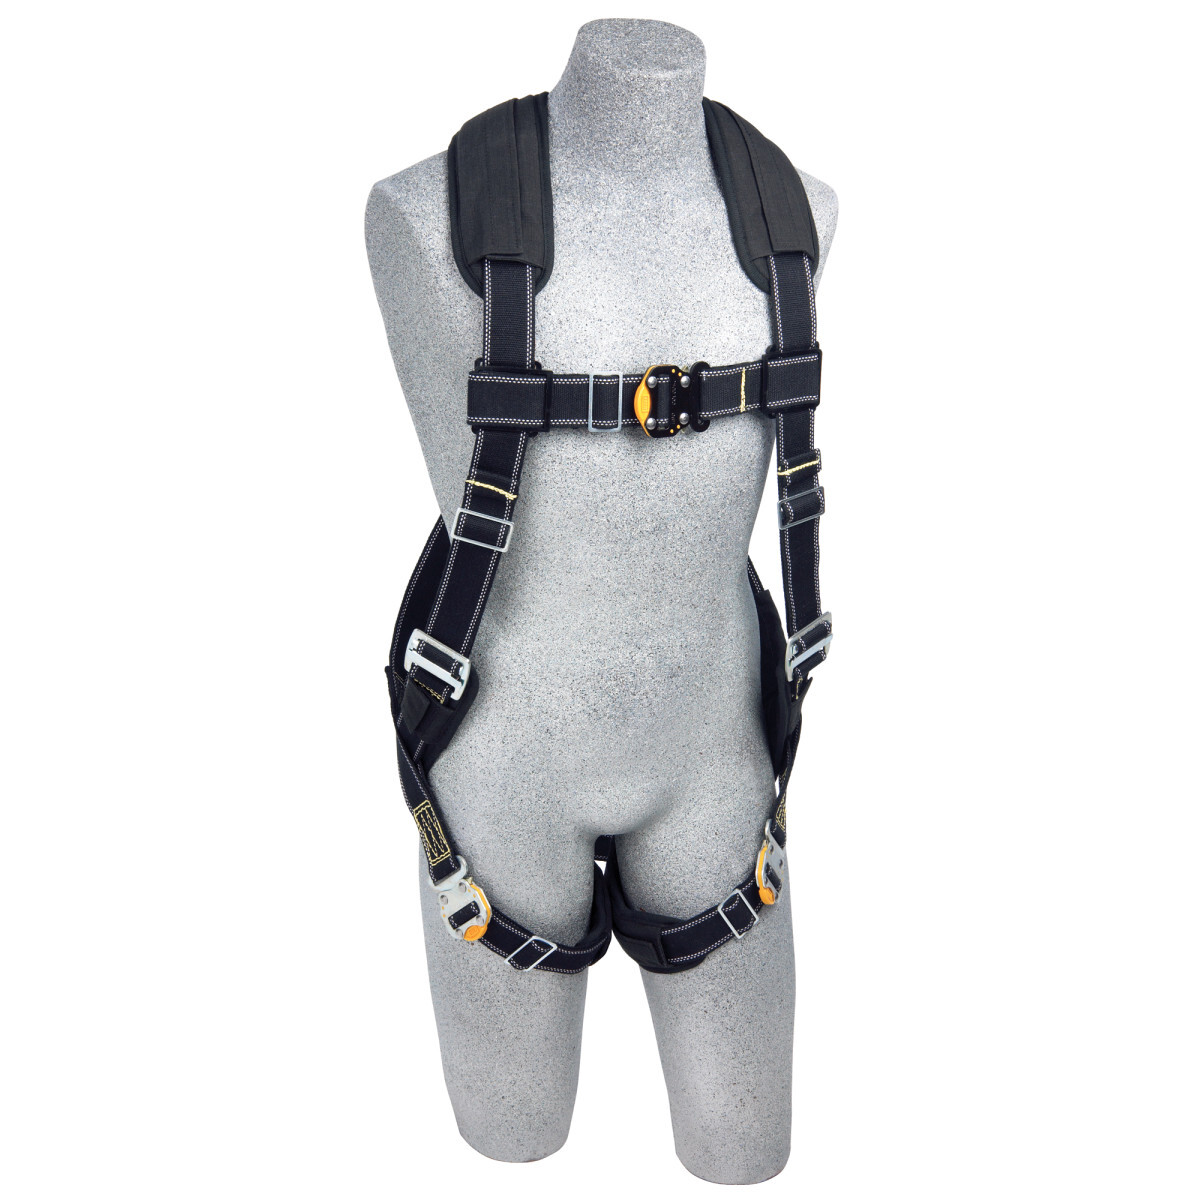 3M™ DBI-SALA® X-Large ExoFit™ XP Arc Flash Flame Resistant Full Body/Vest Style Harness With Back D-Ring, Comfort Padding, Leath